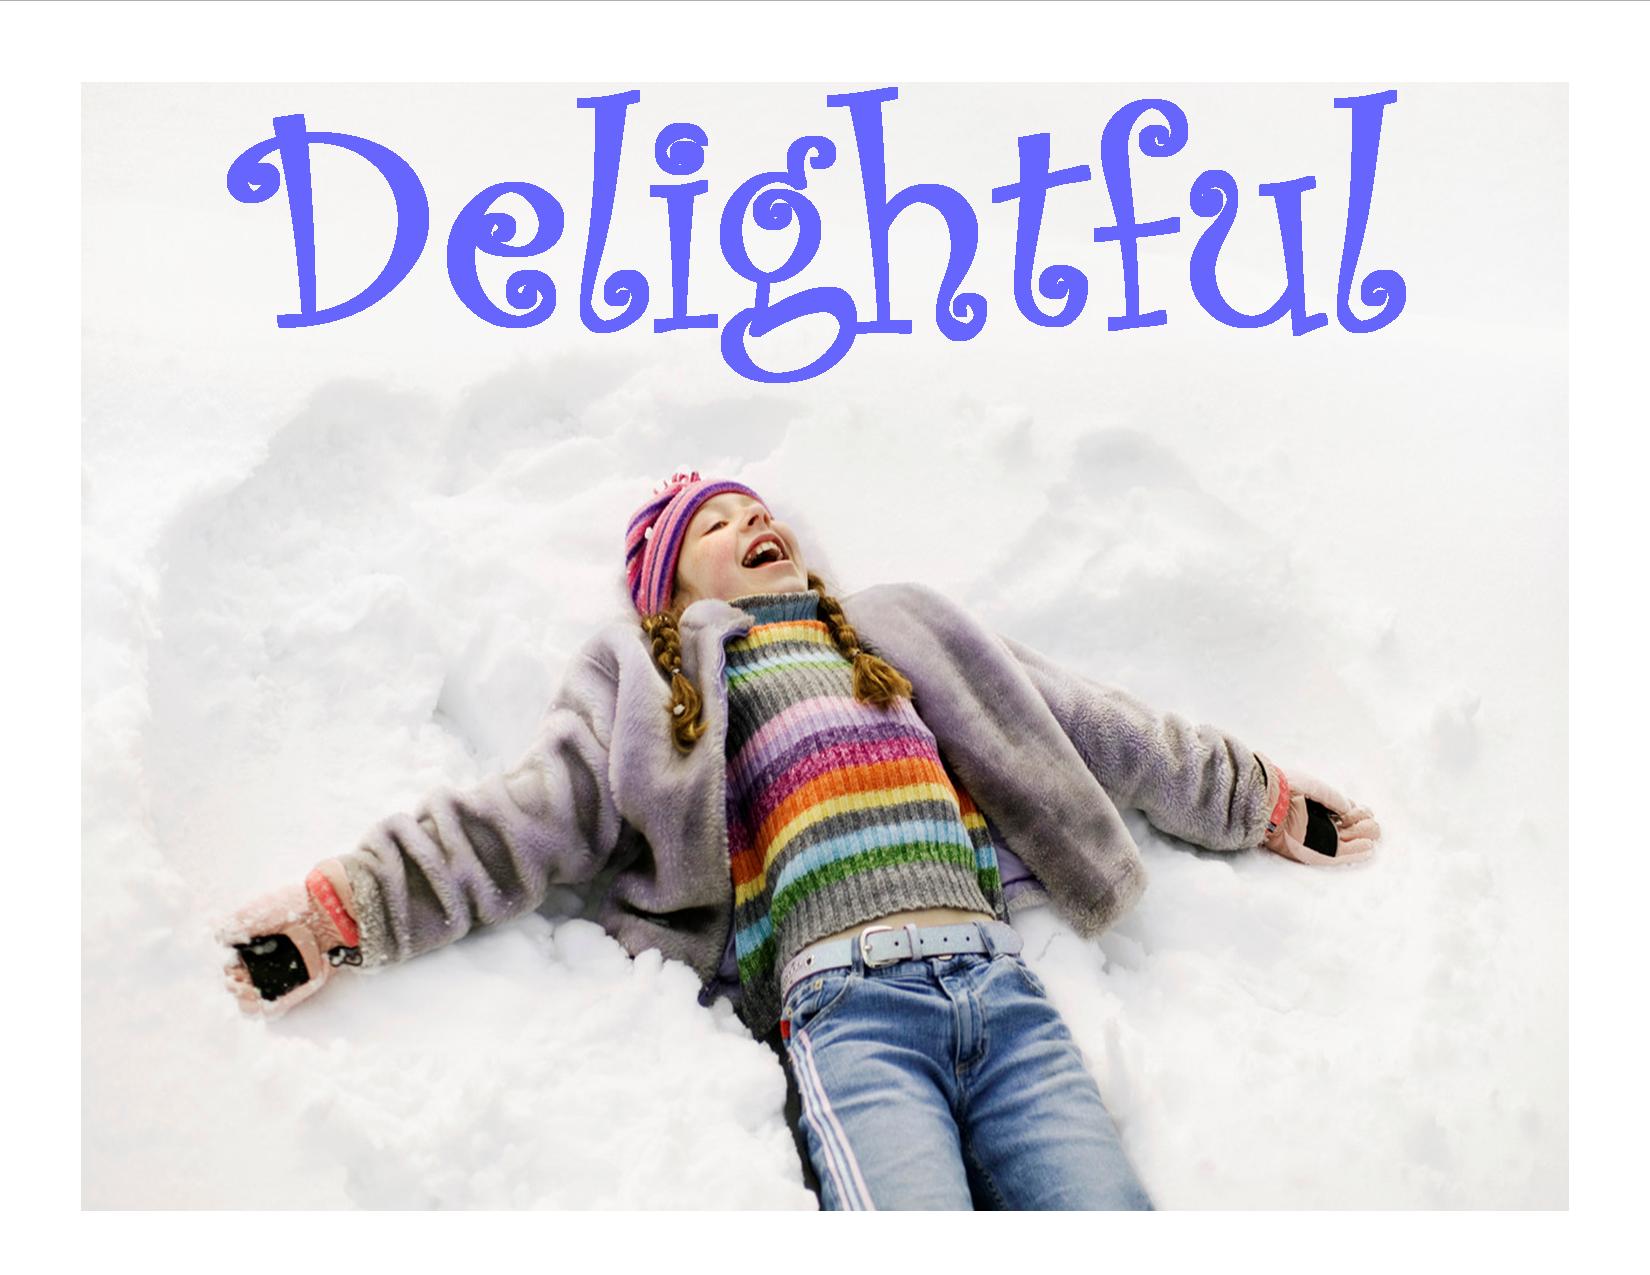 Have You Had A Healthy Dose Of Delight Today? | Hearken Institute